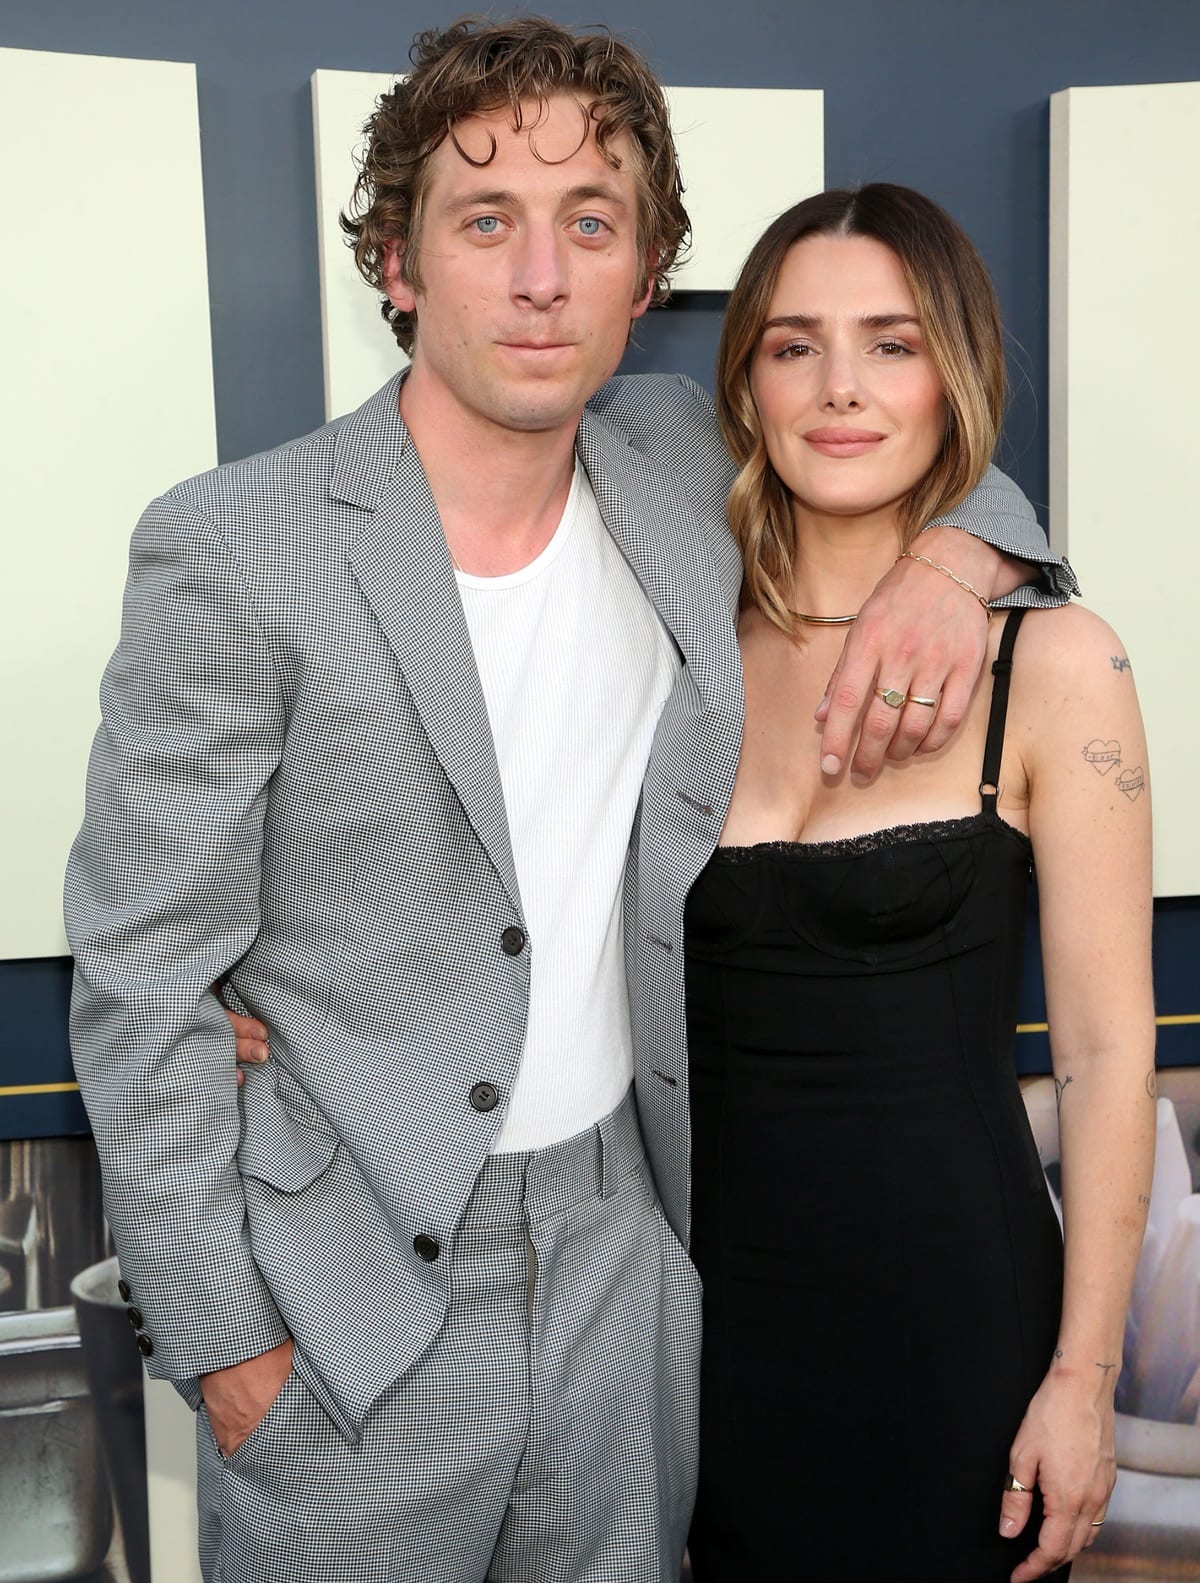 Jeremy Allen White and Addison Timlin, who met in 2008 during the filming of Afterschool, have decided to split